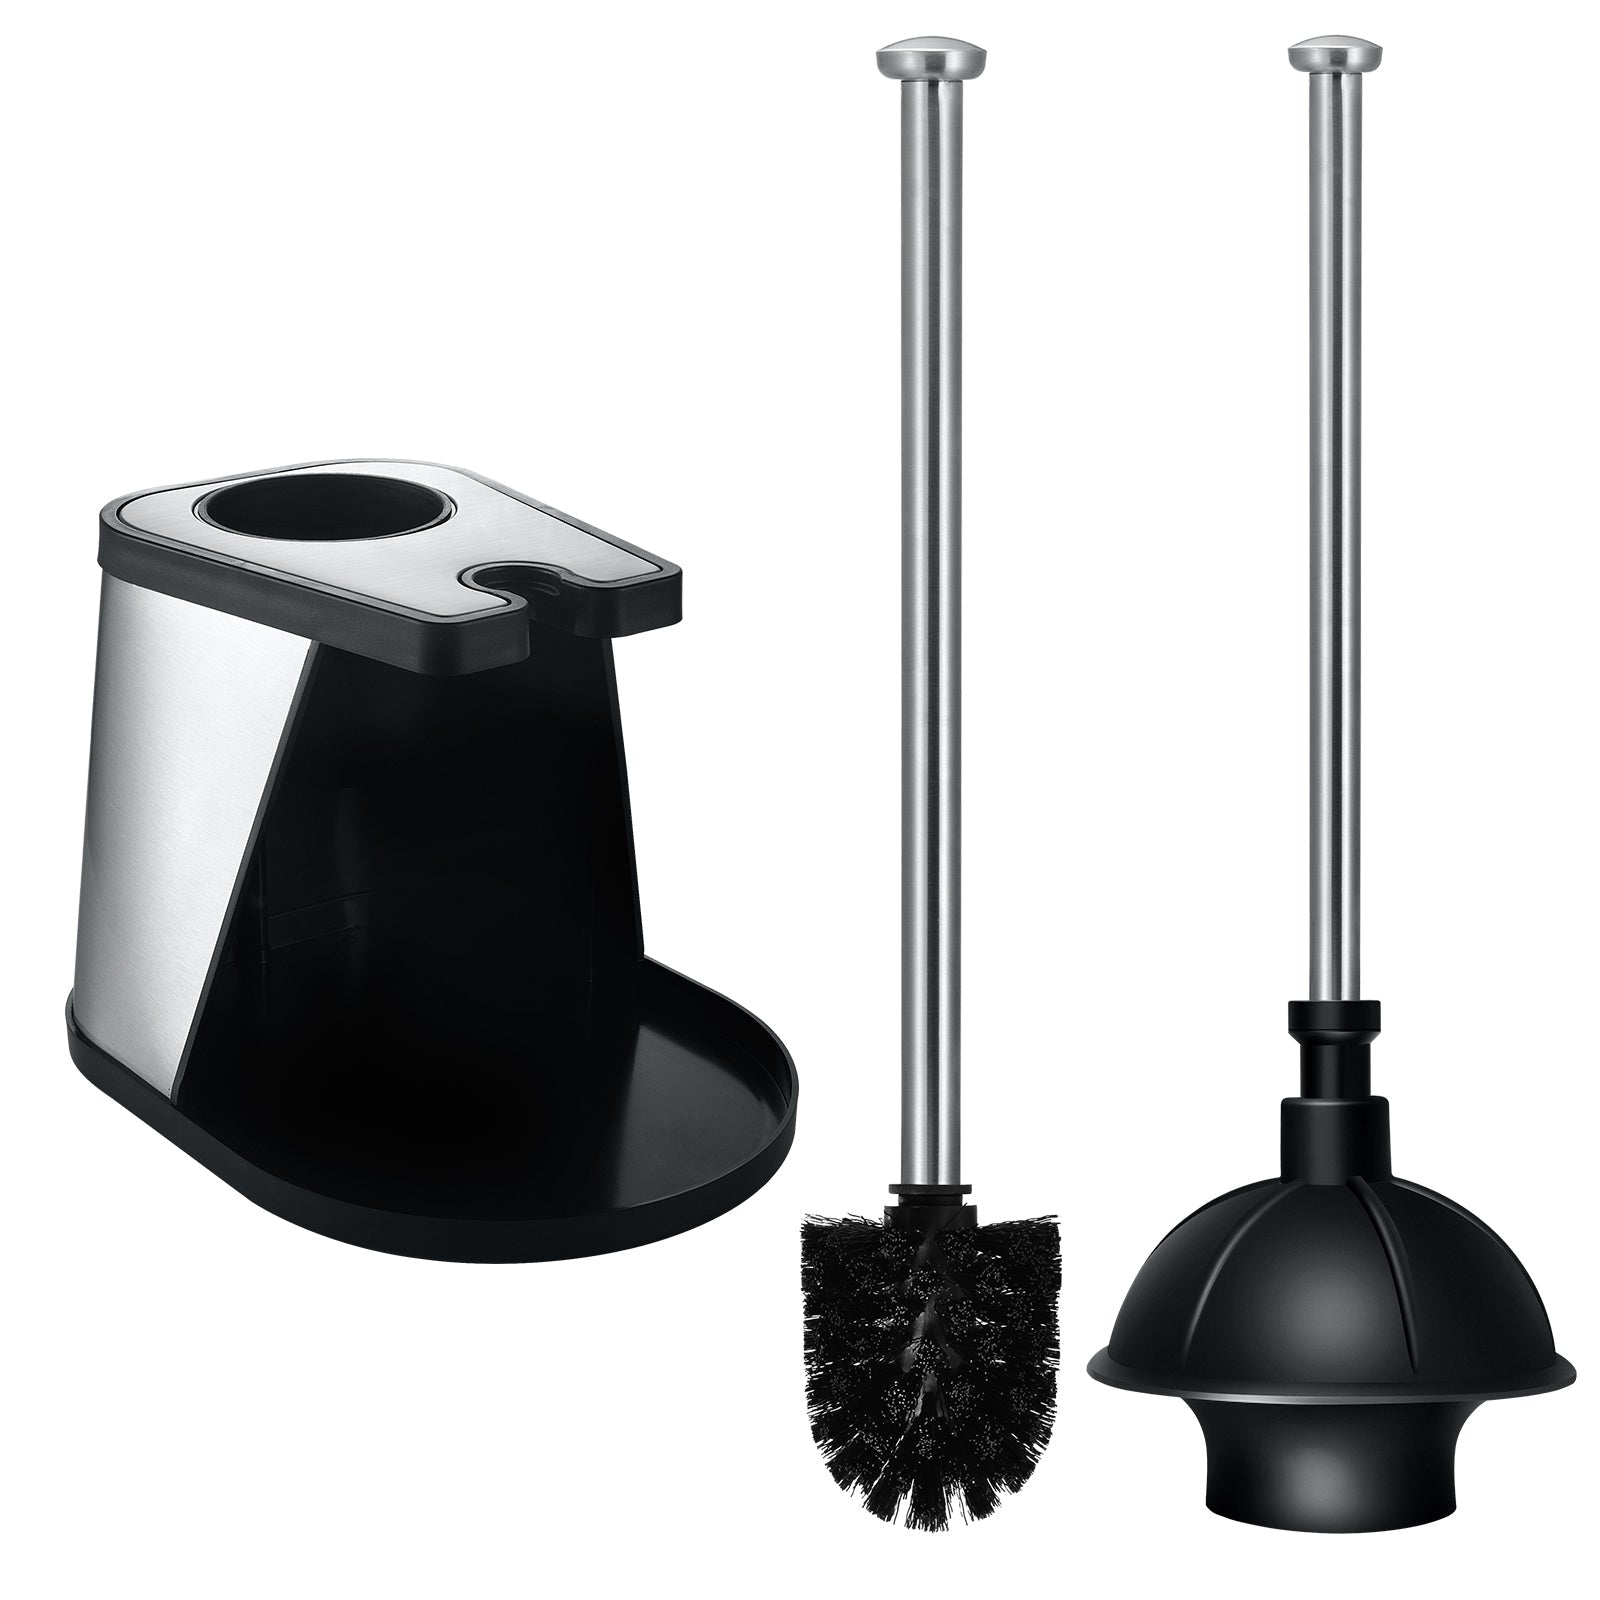 ToiletTree Products Toilet Plunger & Bowl Brush Combo for Bathroom Cleaning - Stainless Steel Heavy Duty Unclogger Plunger & Cleaner Brush Set with 2